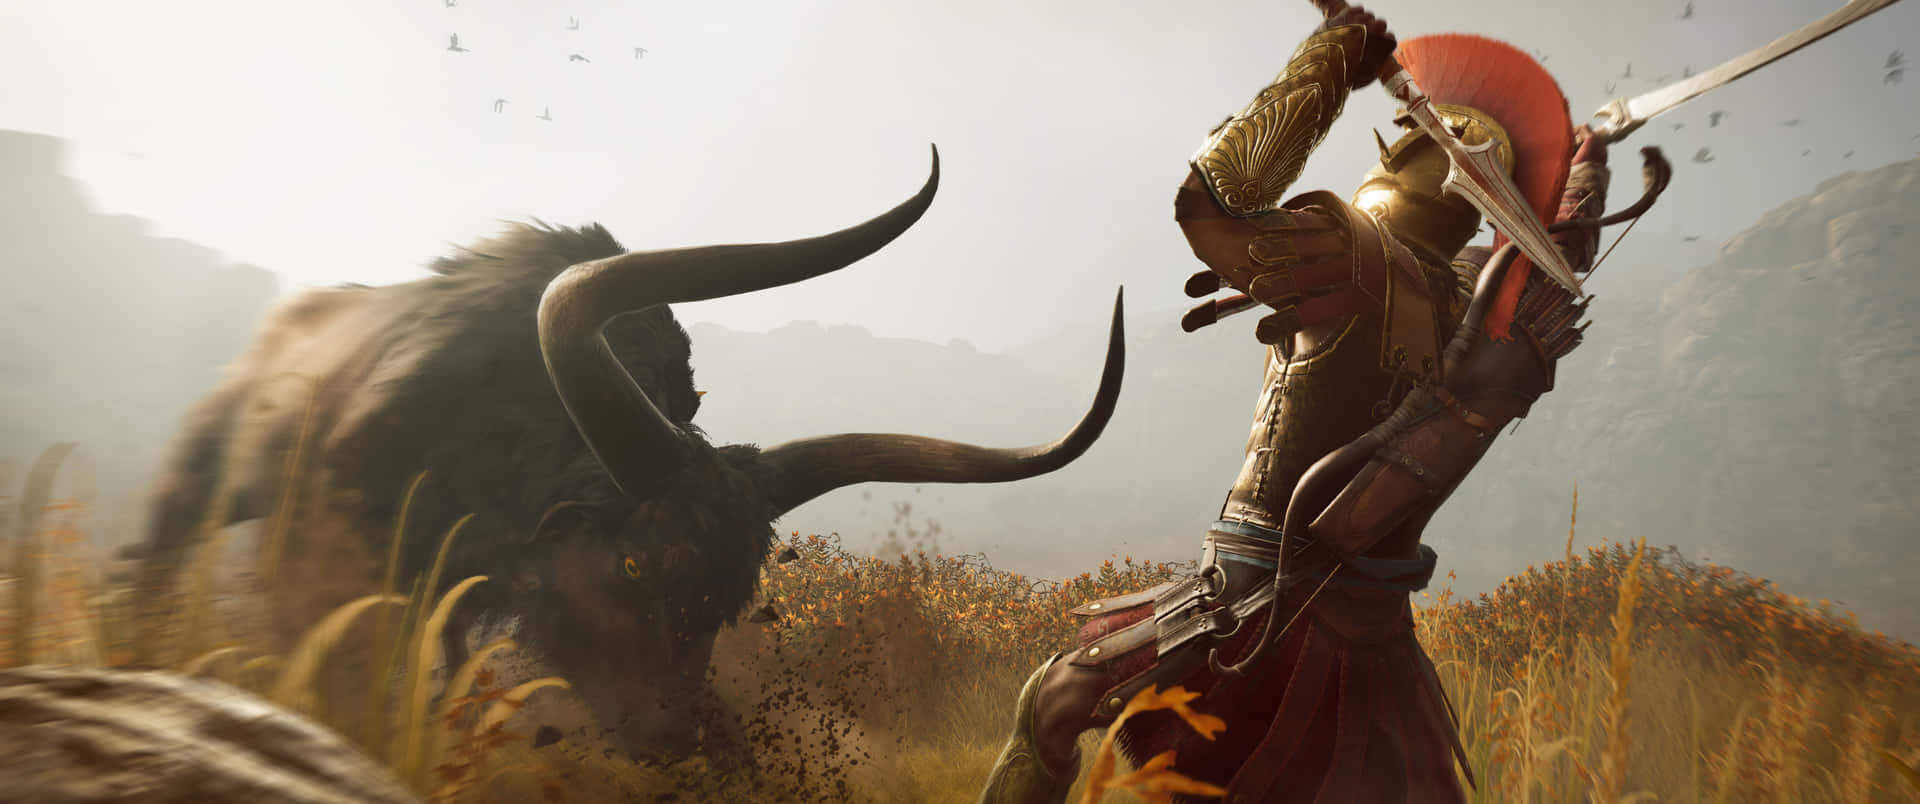 3440x1440p Assassin's Creed Odyssey Background Assassin Fighting A Bull Background